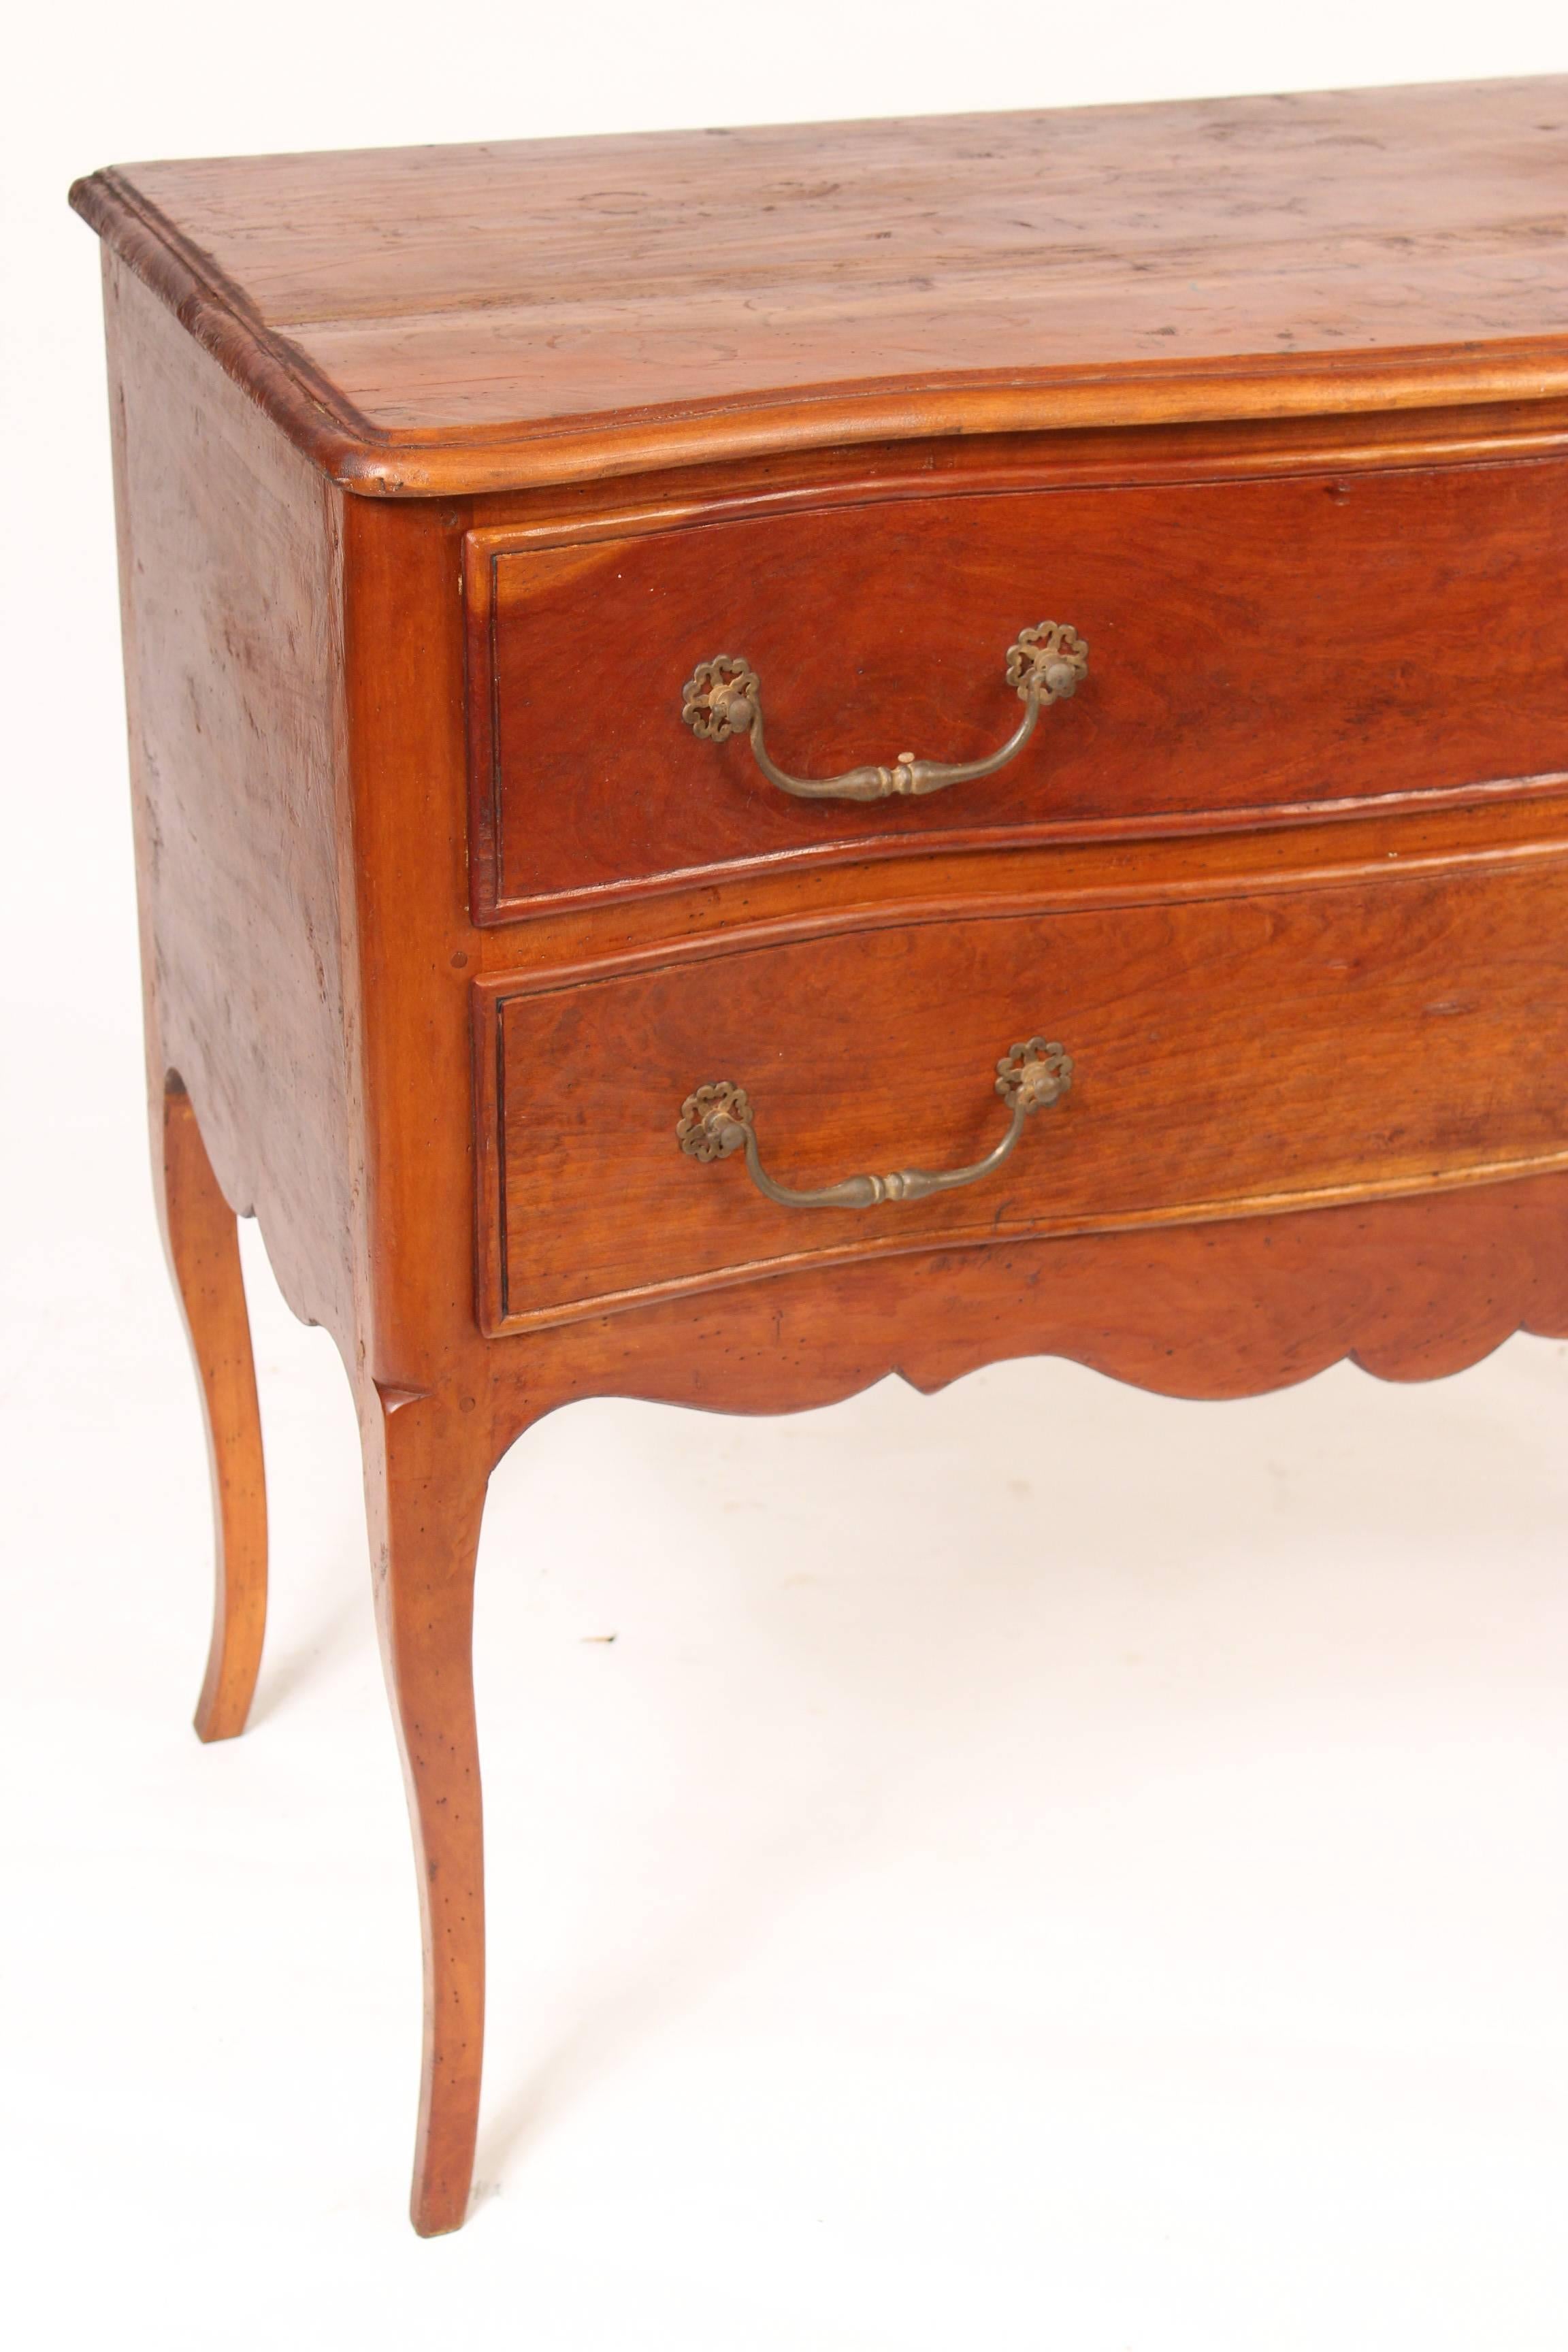 Louis XV provincial style, beech wood, serpentine front, two drawer, chest of drawers with steel pulls, circa 1900.